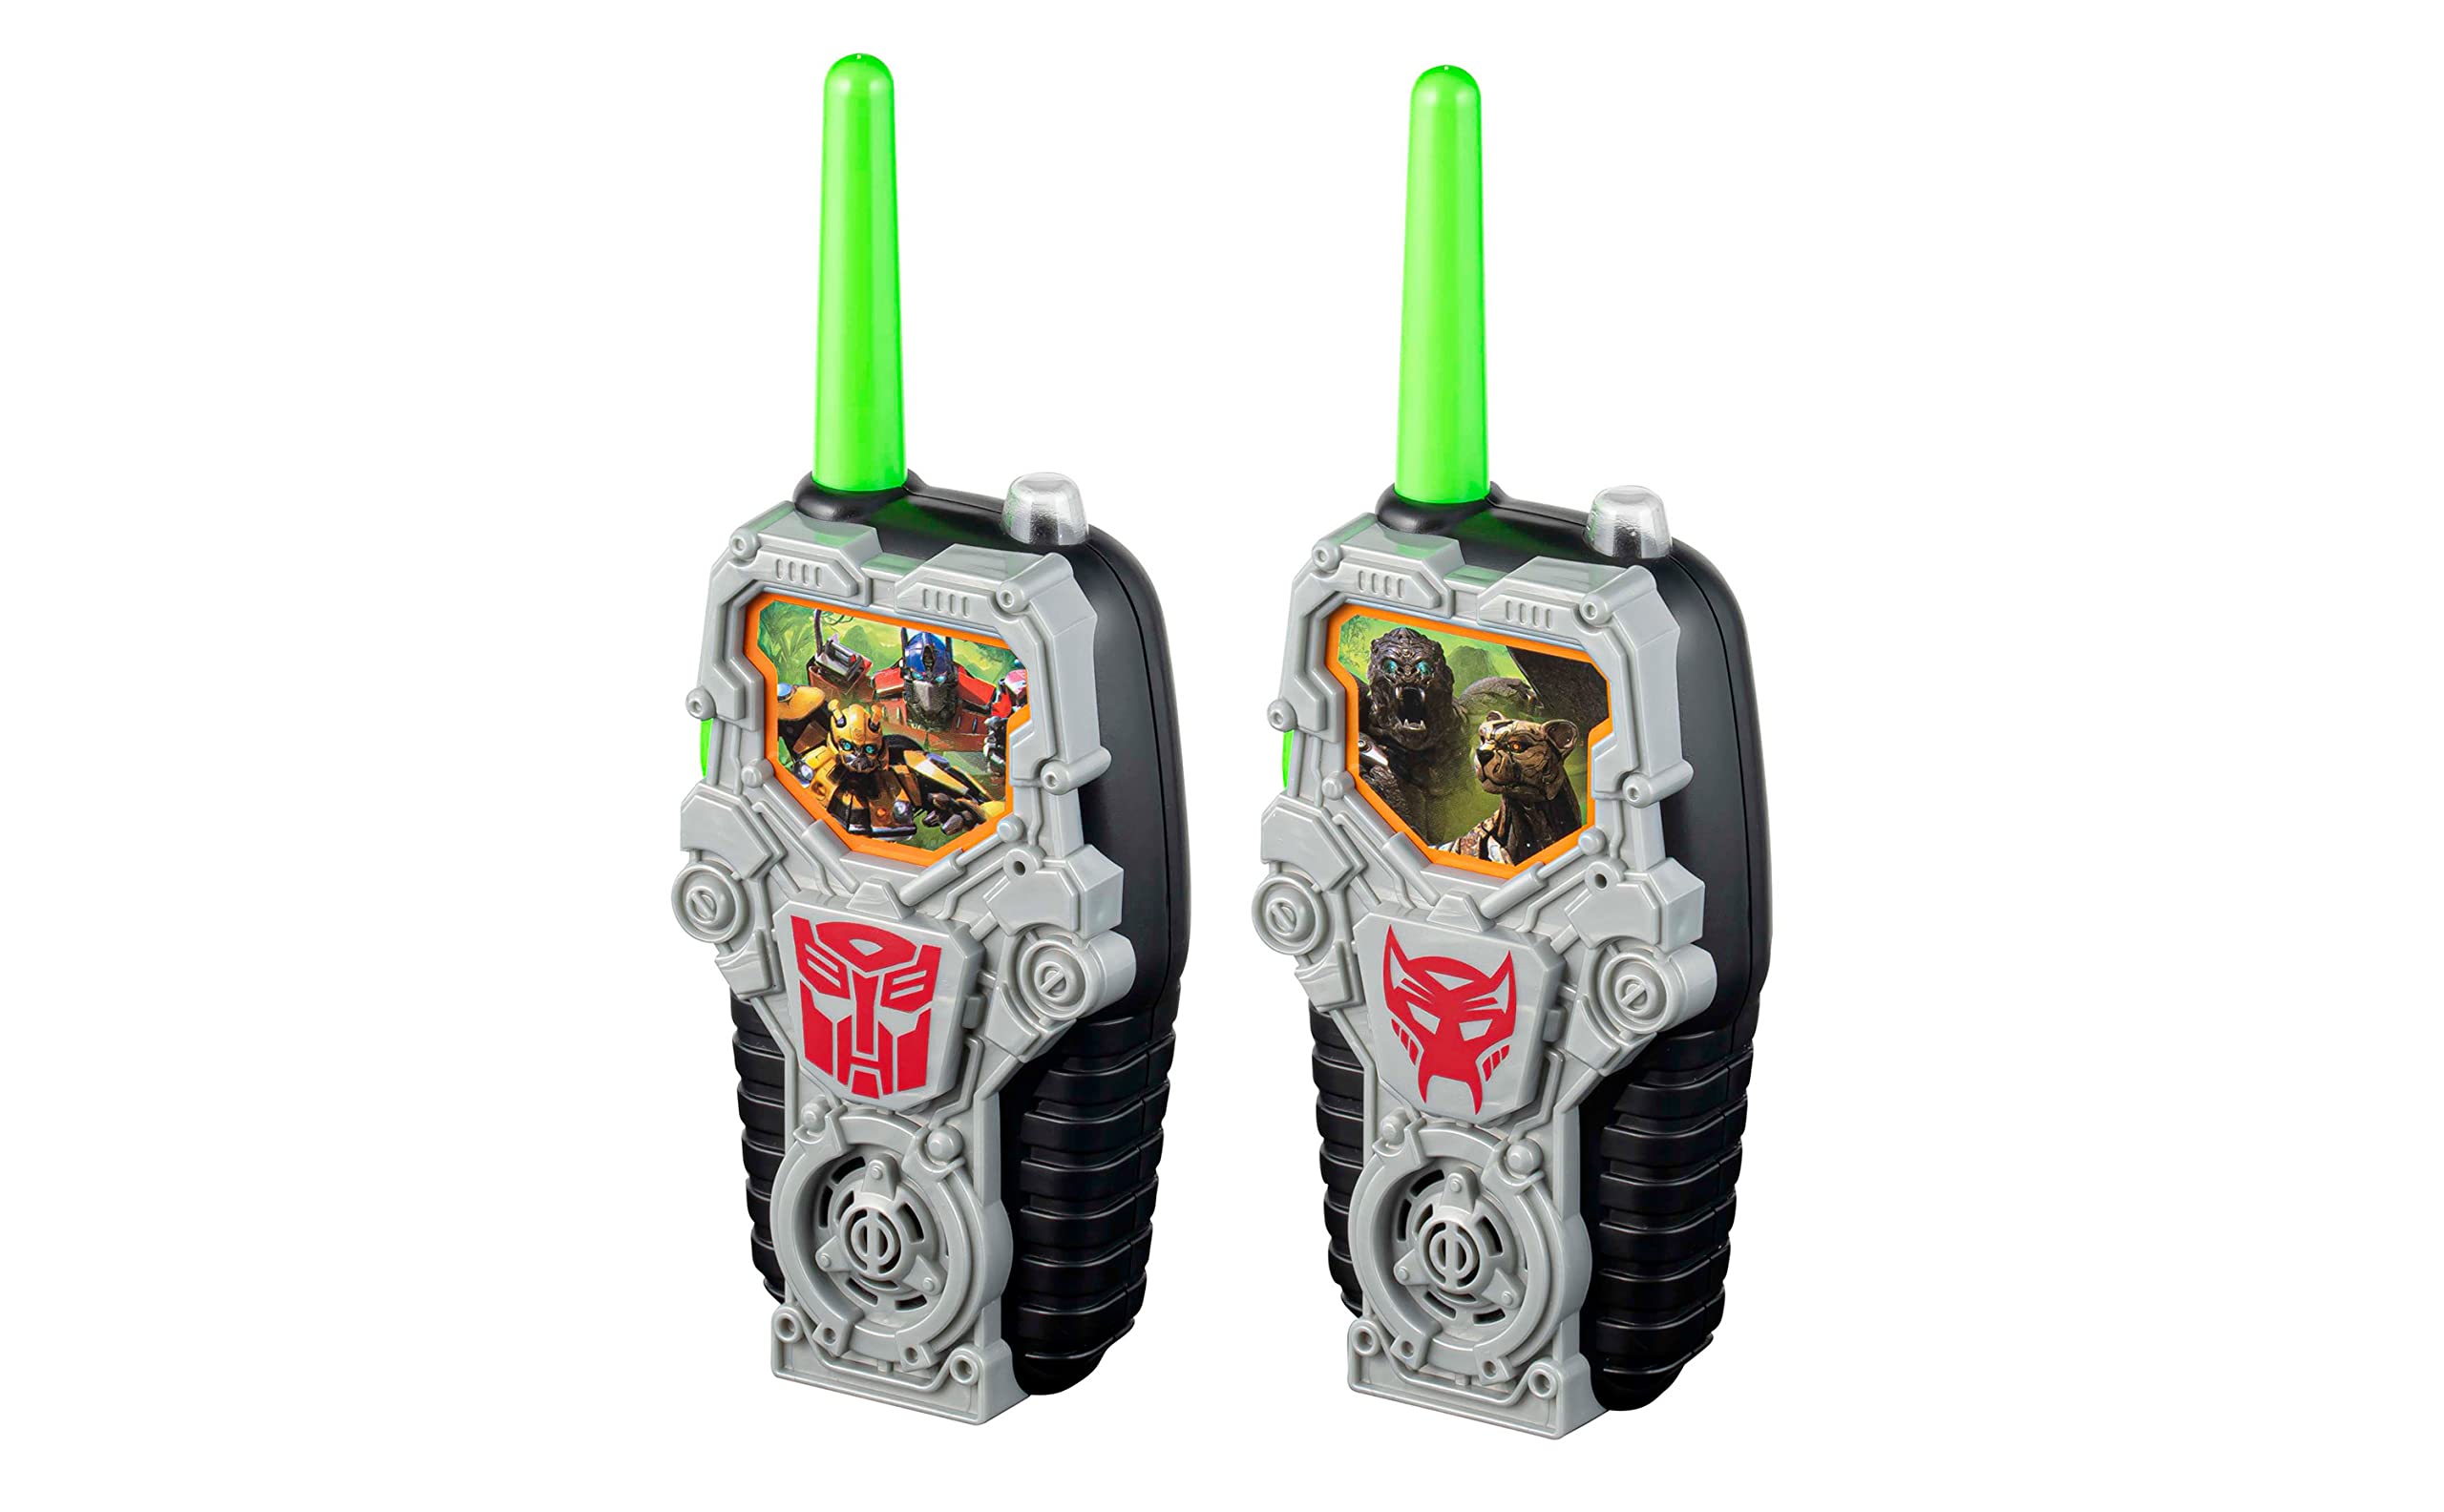 eKids Transformers Toy Walkie Talkies for Kids, Light-Up Indoor and Outdoor Toys for Kids and Fans of Transformers Toys